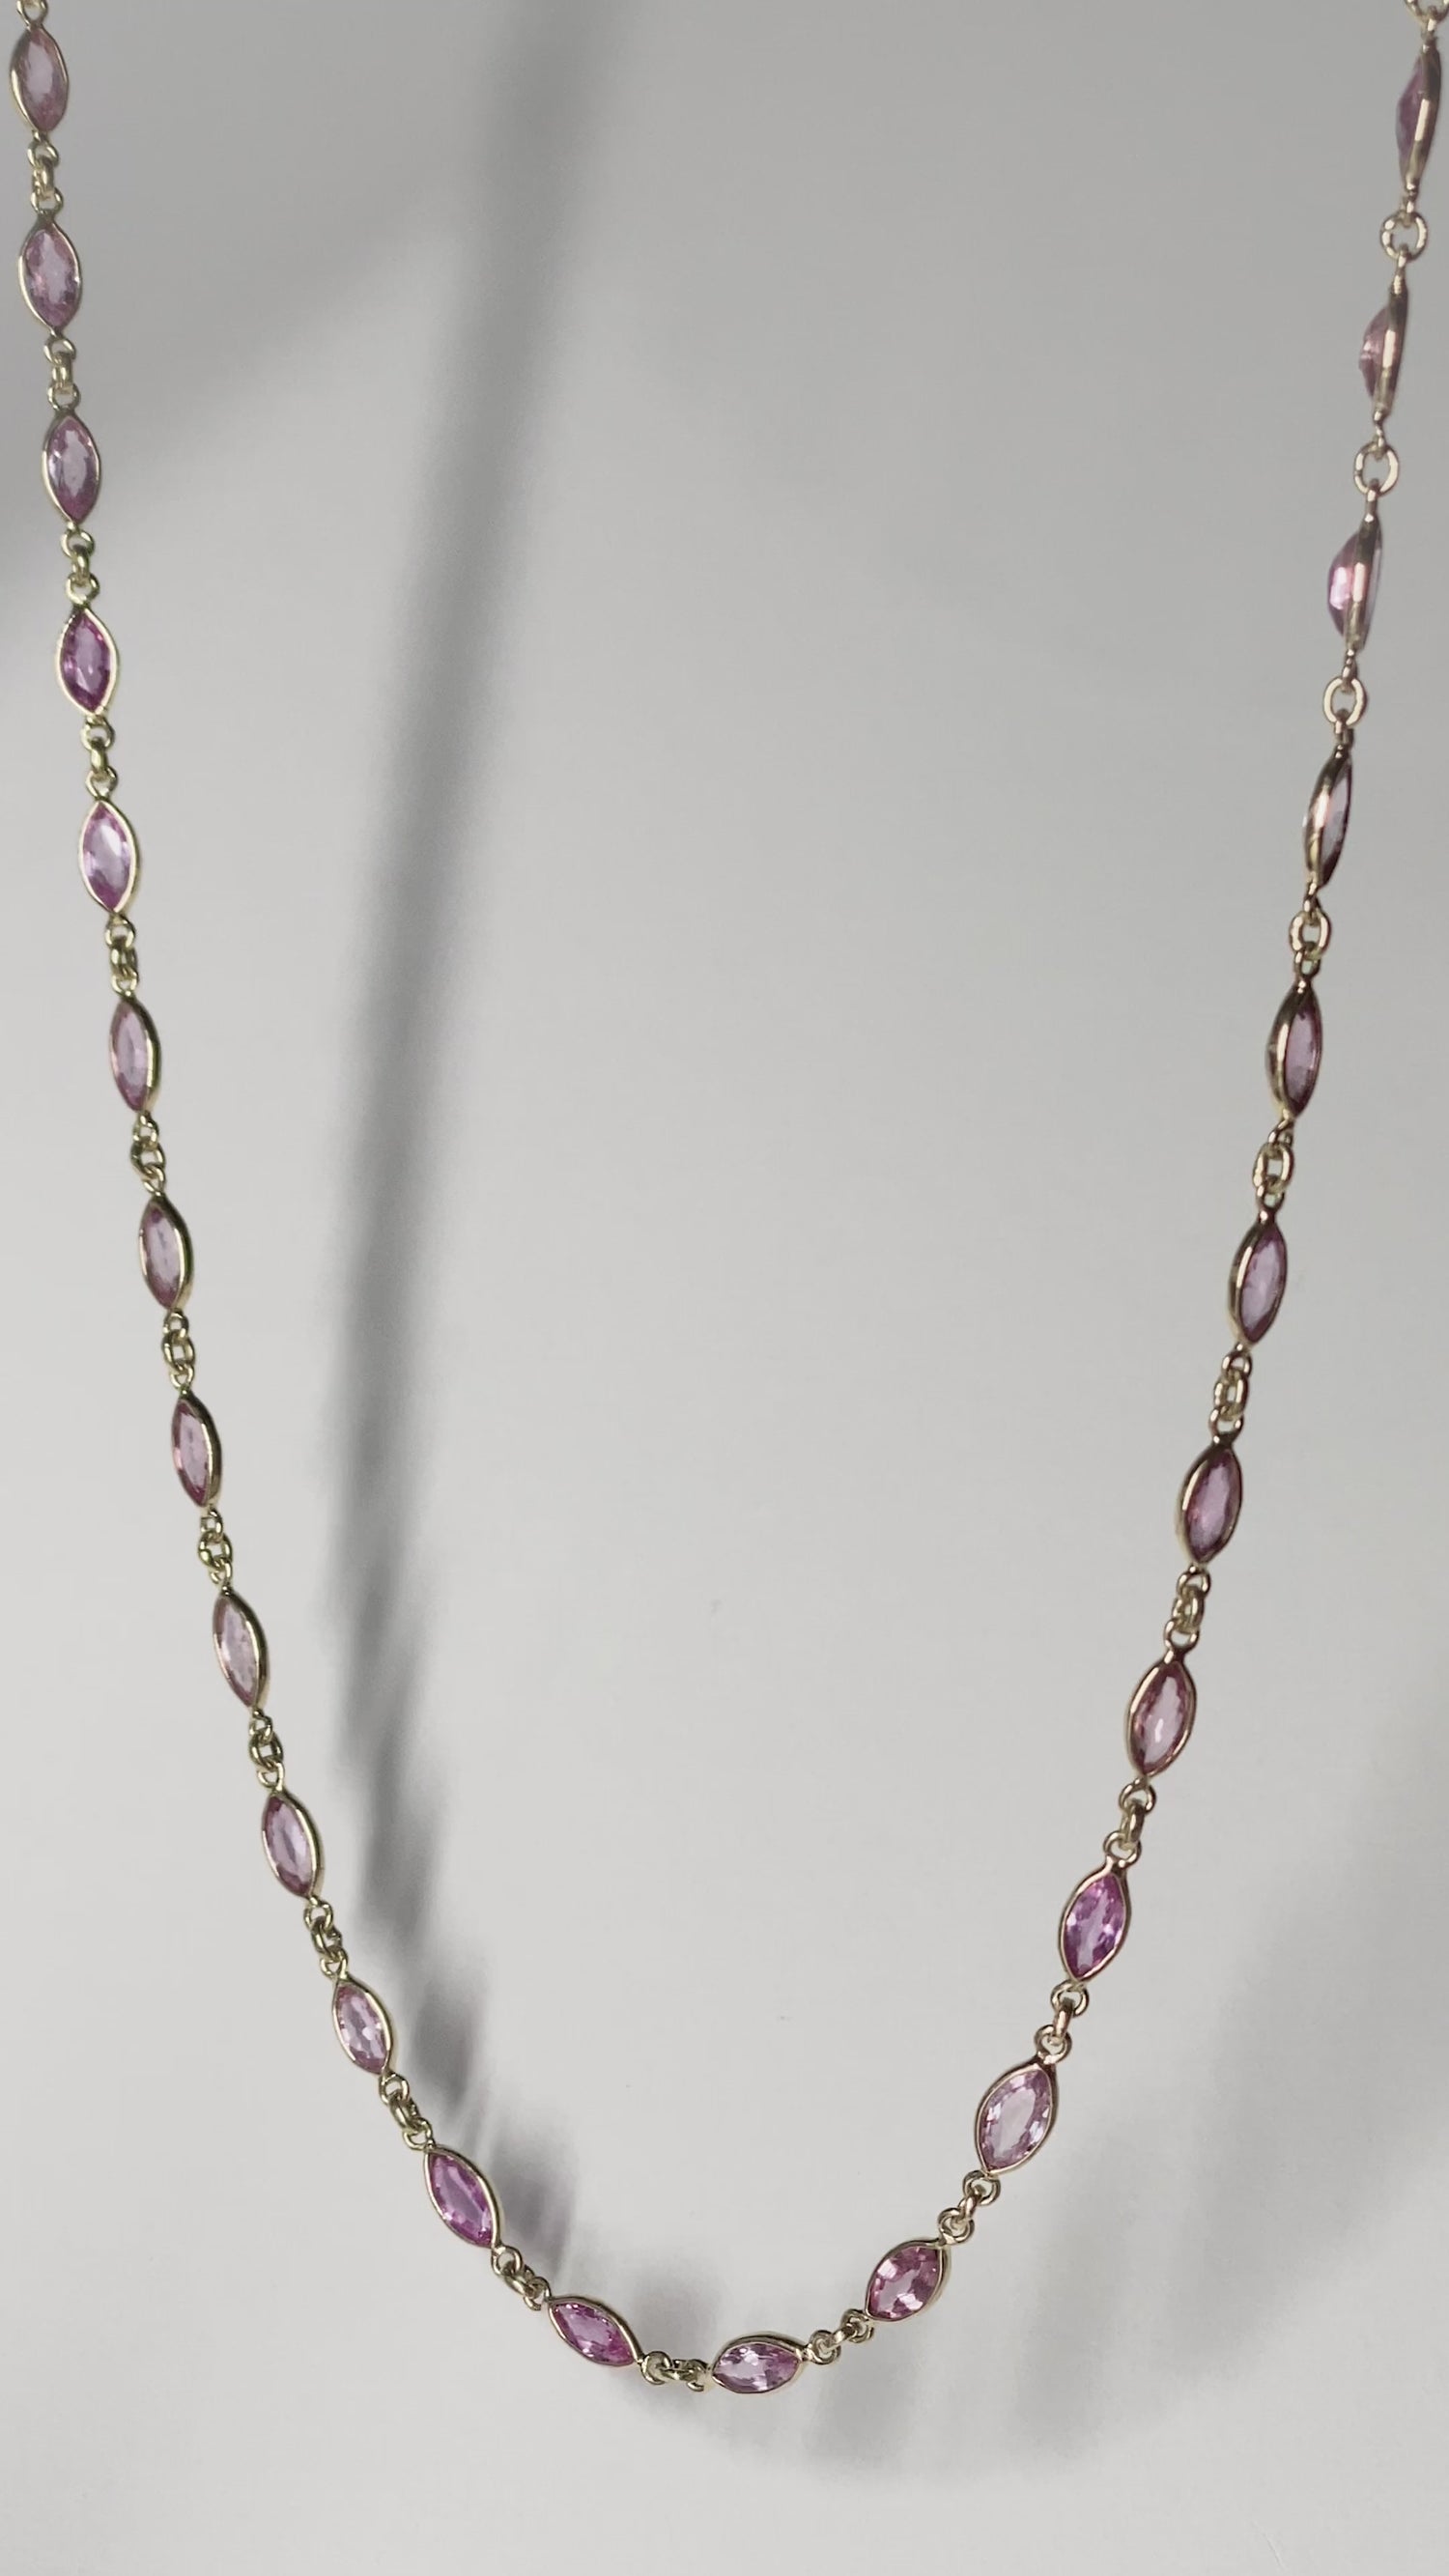 ILA SODHANI Camilla necklace with marquise cut natural pink sapphires set in yellow gold is shown hanging in front of a white background, swaying gently in the light.